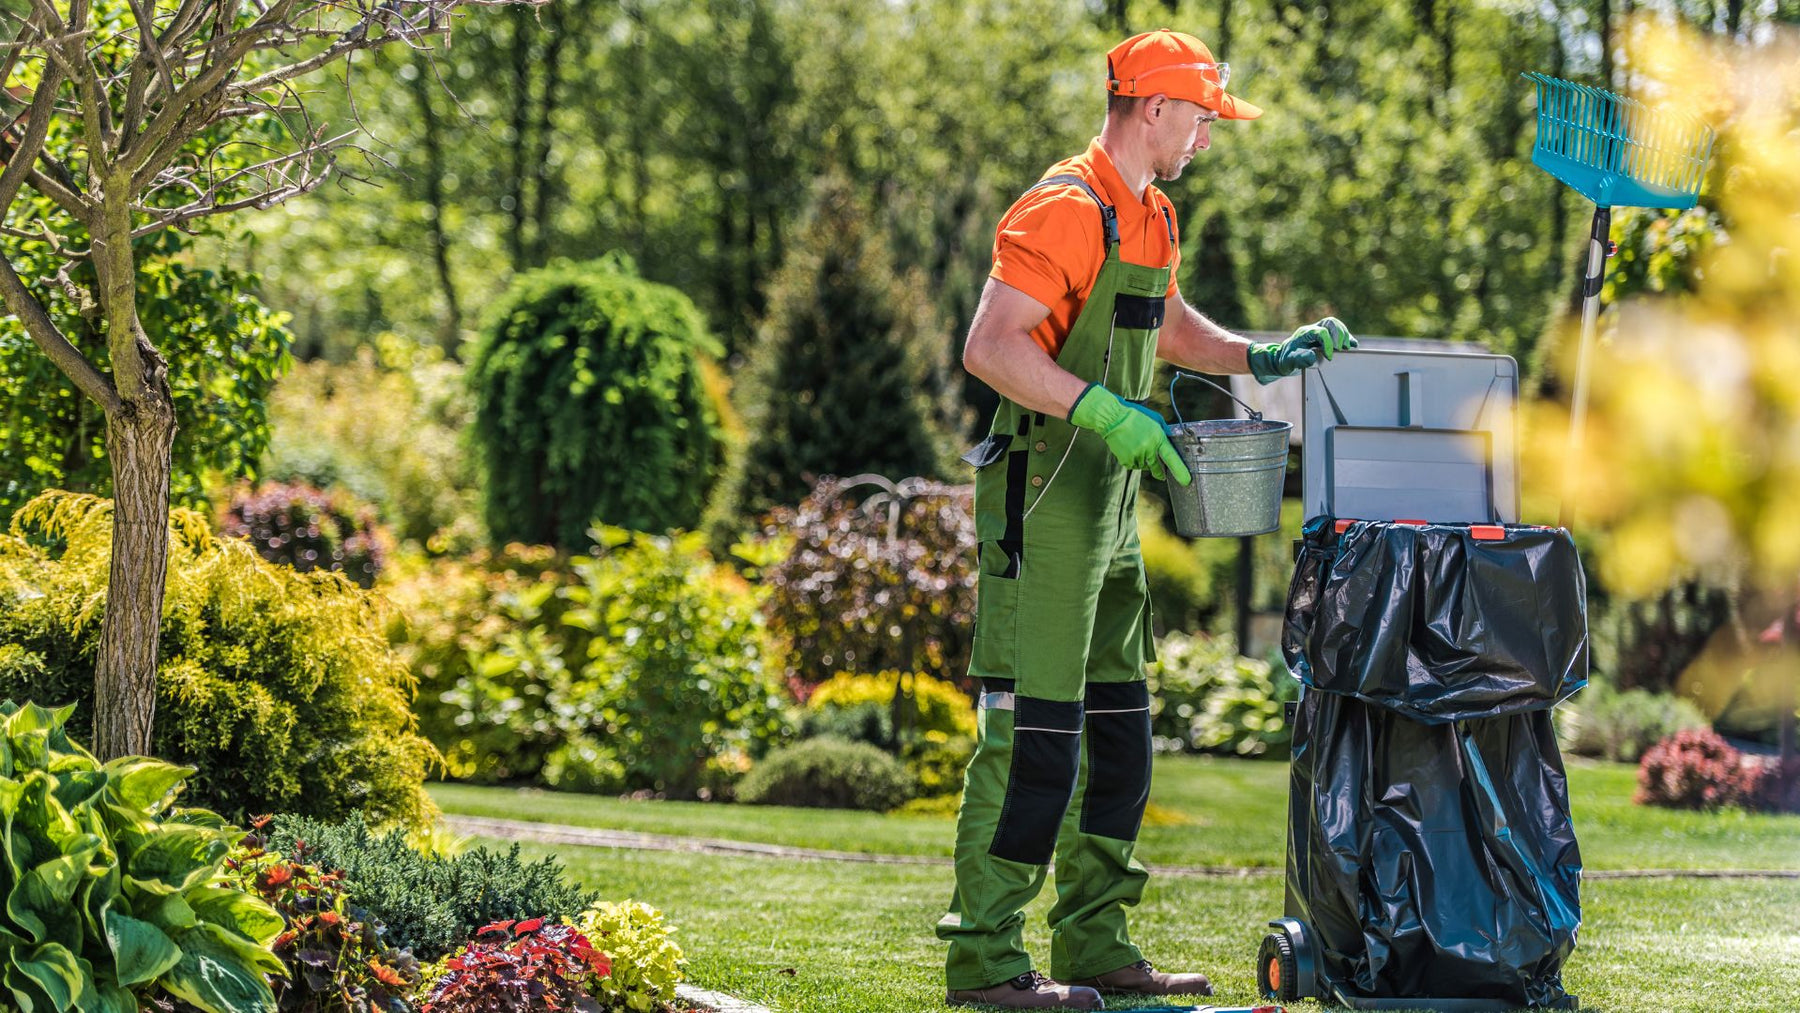 Embrace the Bloom: Spring into Action with Baker's Ace Hardware and STIHL